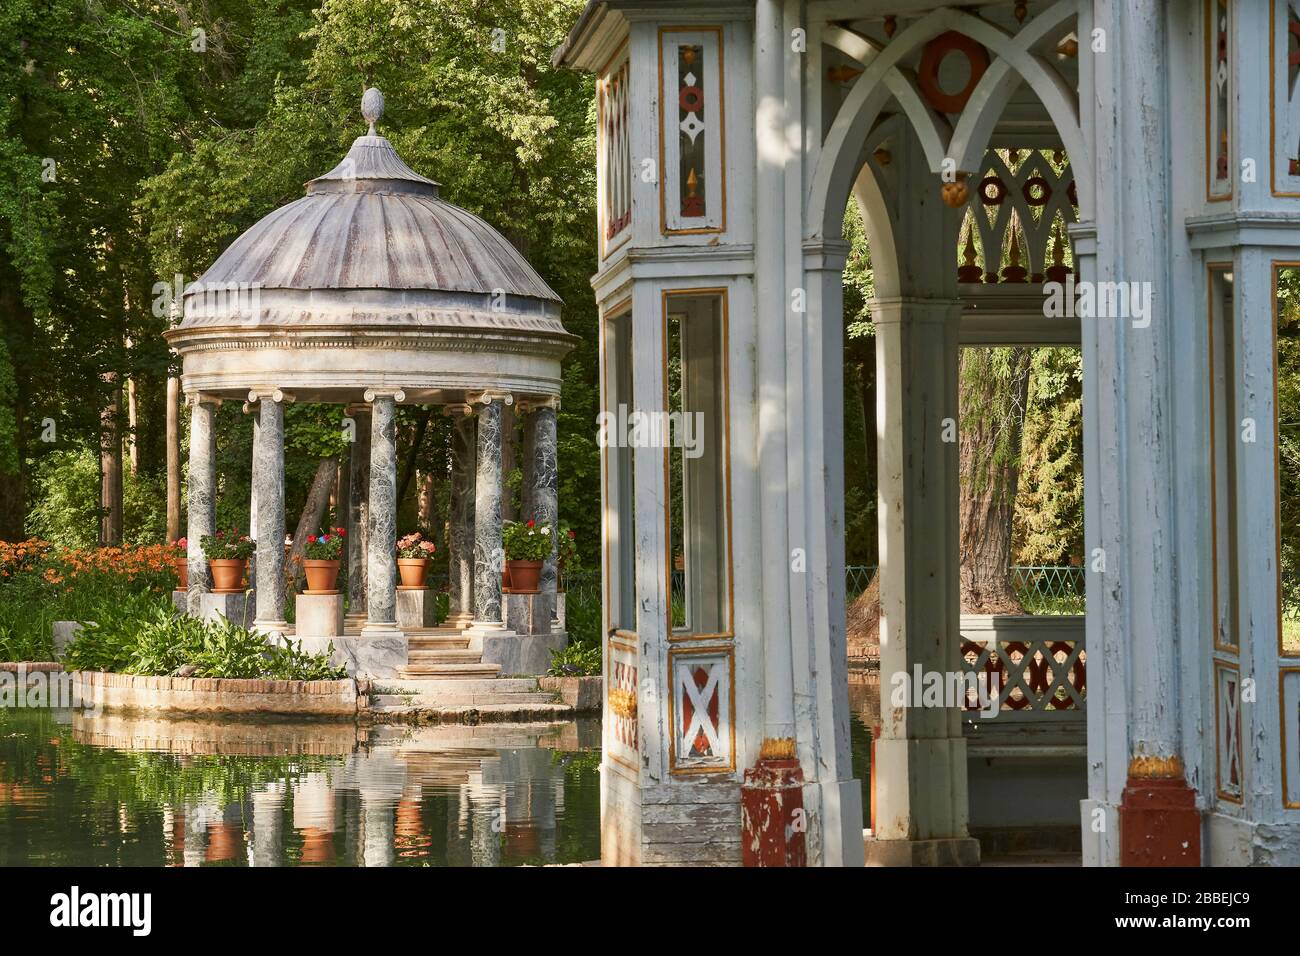 irrigation and landscaping systems in the landscaped garden of Principe, Chinese garden in Aranjuez, Madrid. March 10, 2019 Stock Photo